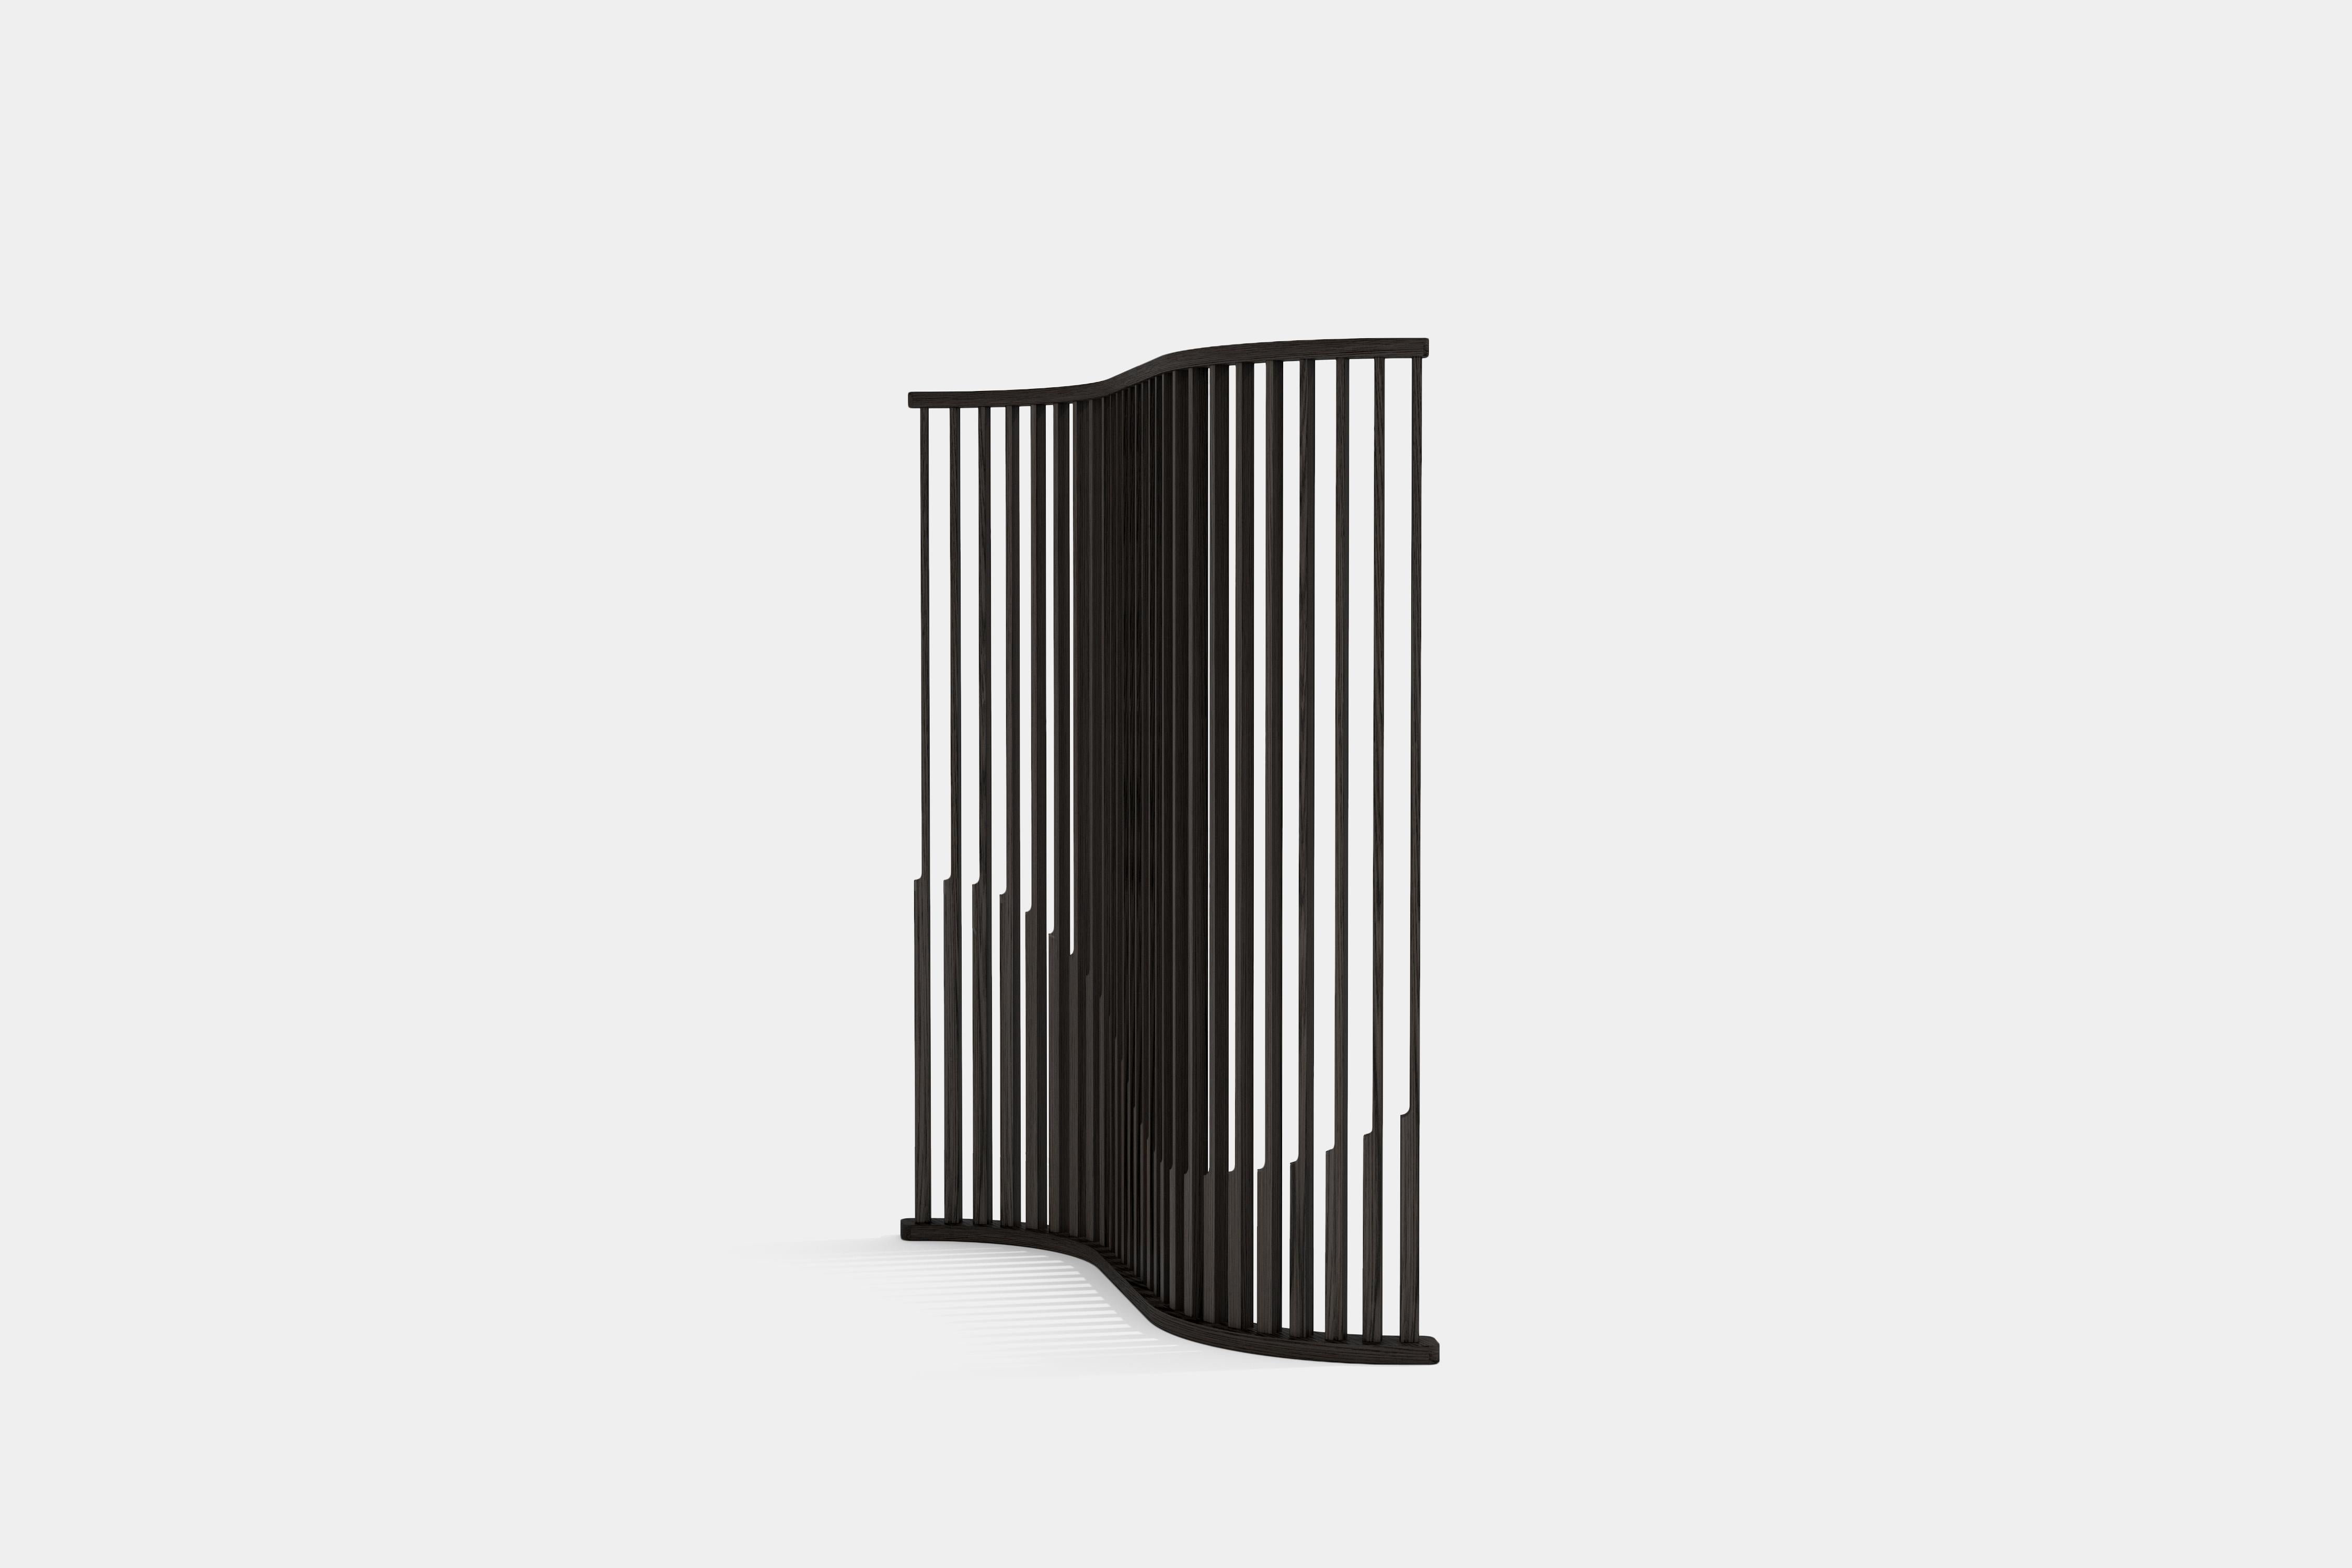 Burnished Laws of Motion Small Room Divider in Dark Wood, Screen by Joel Escalona